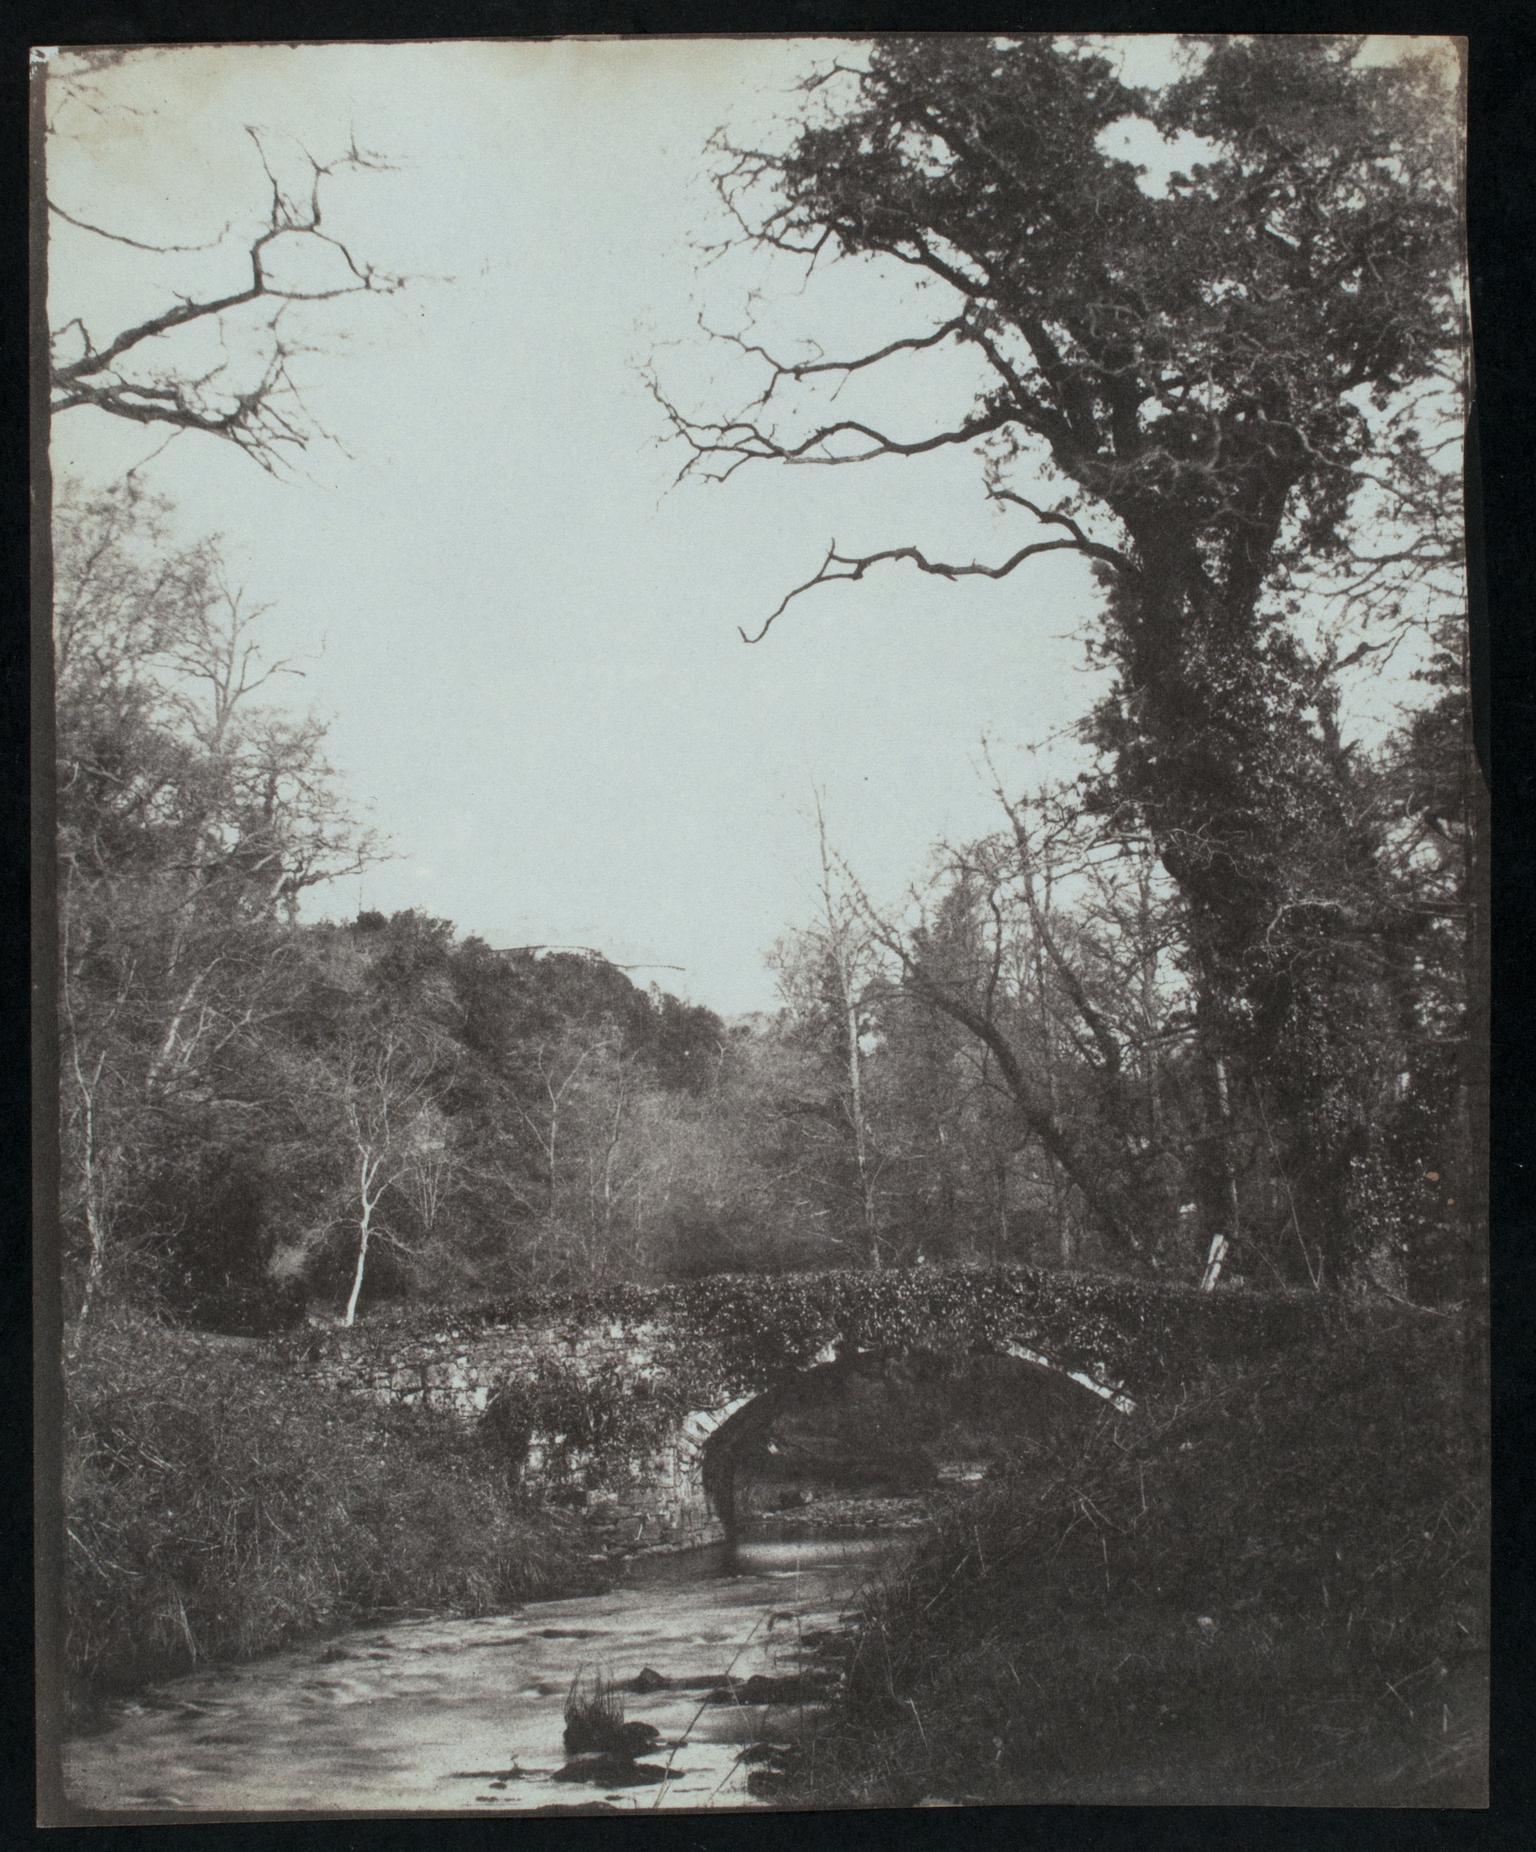 Penllergare, in the valley, photograph